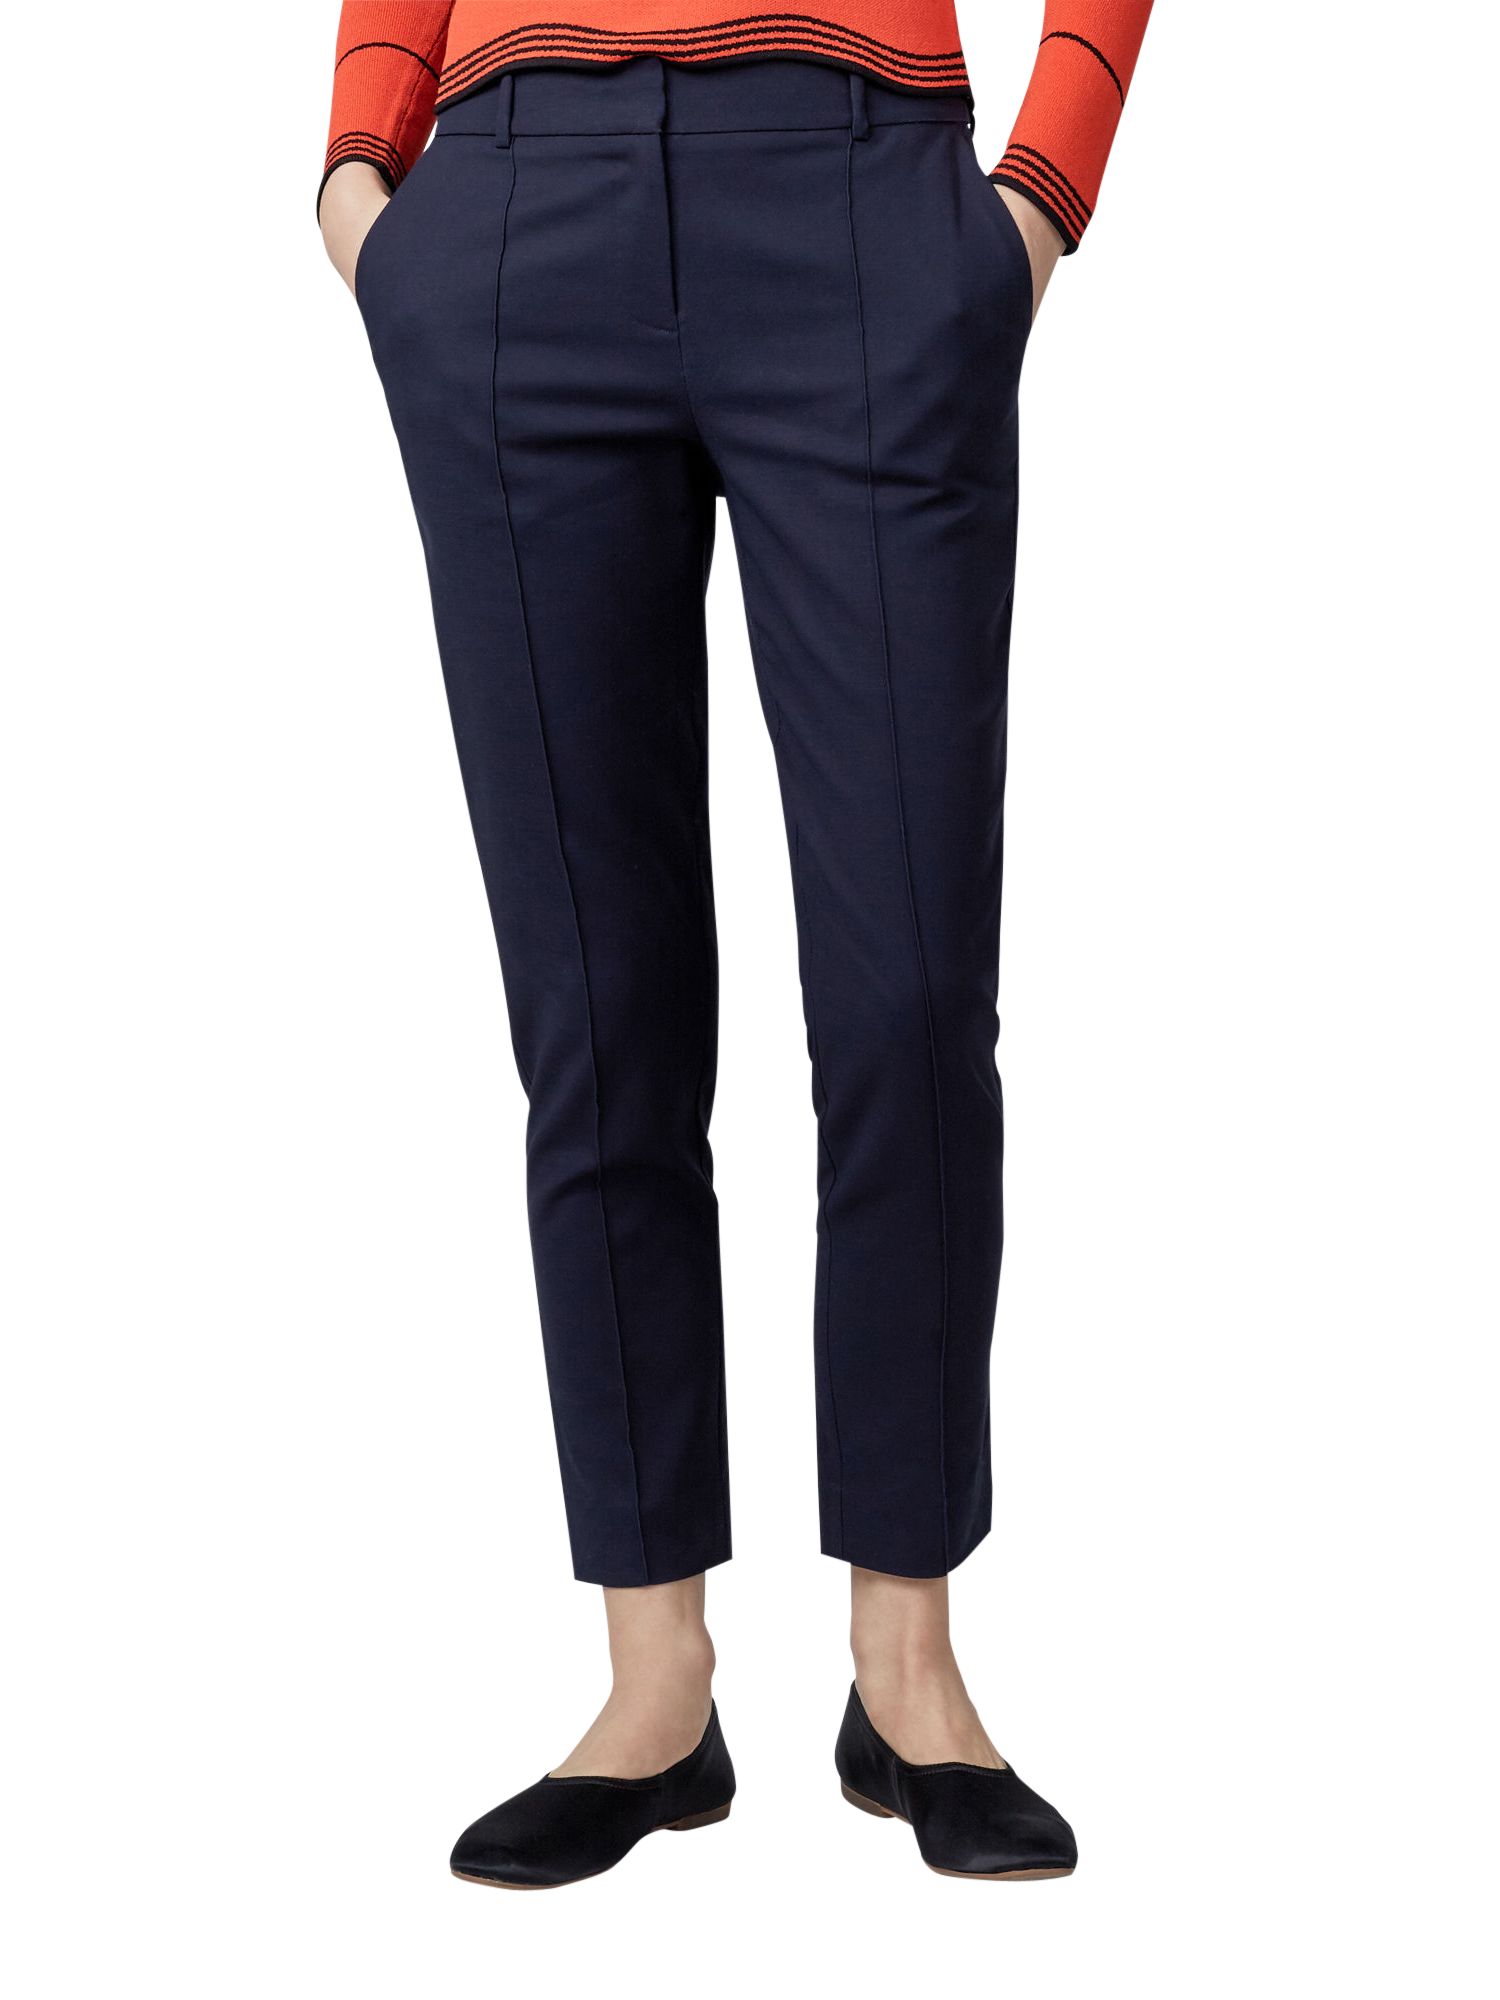 Warehouse Compact Cotton Trousers, Navy, 10